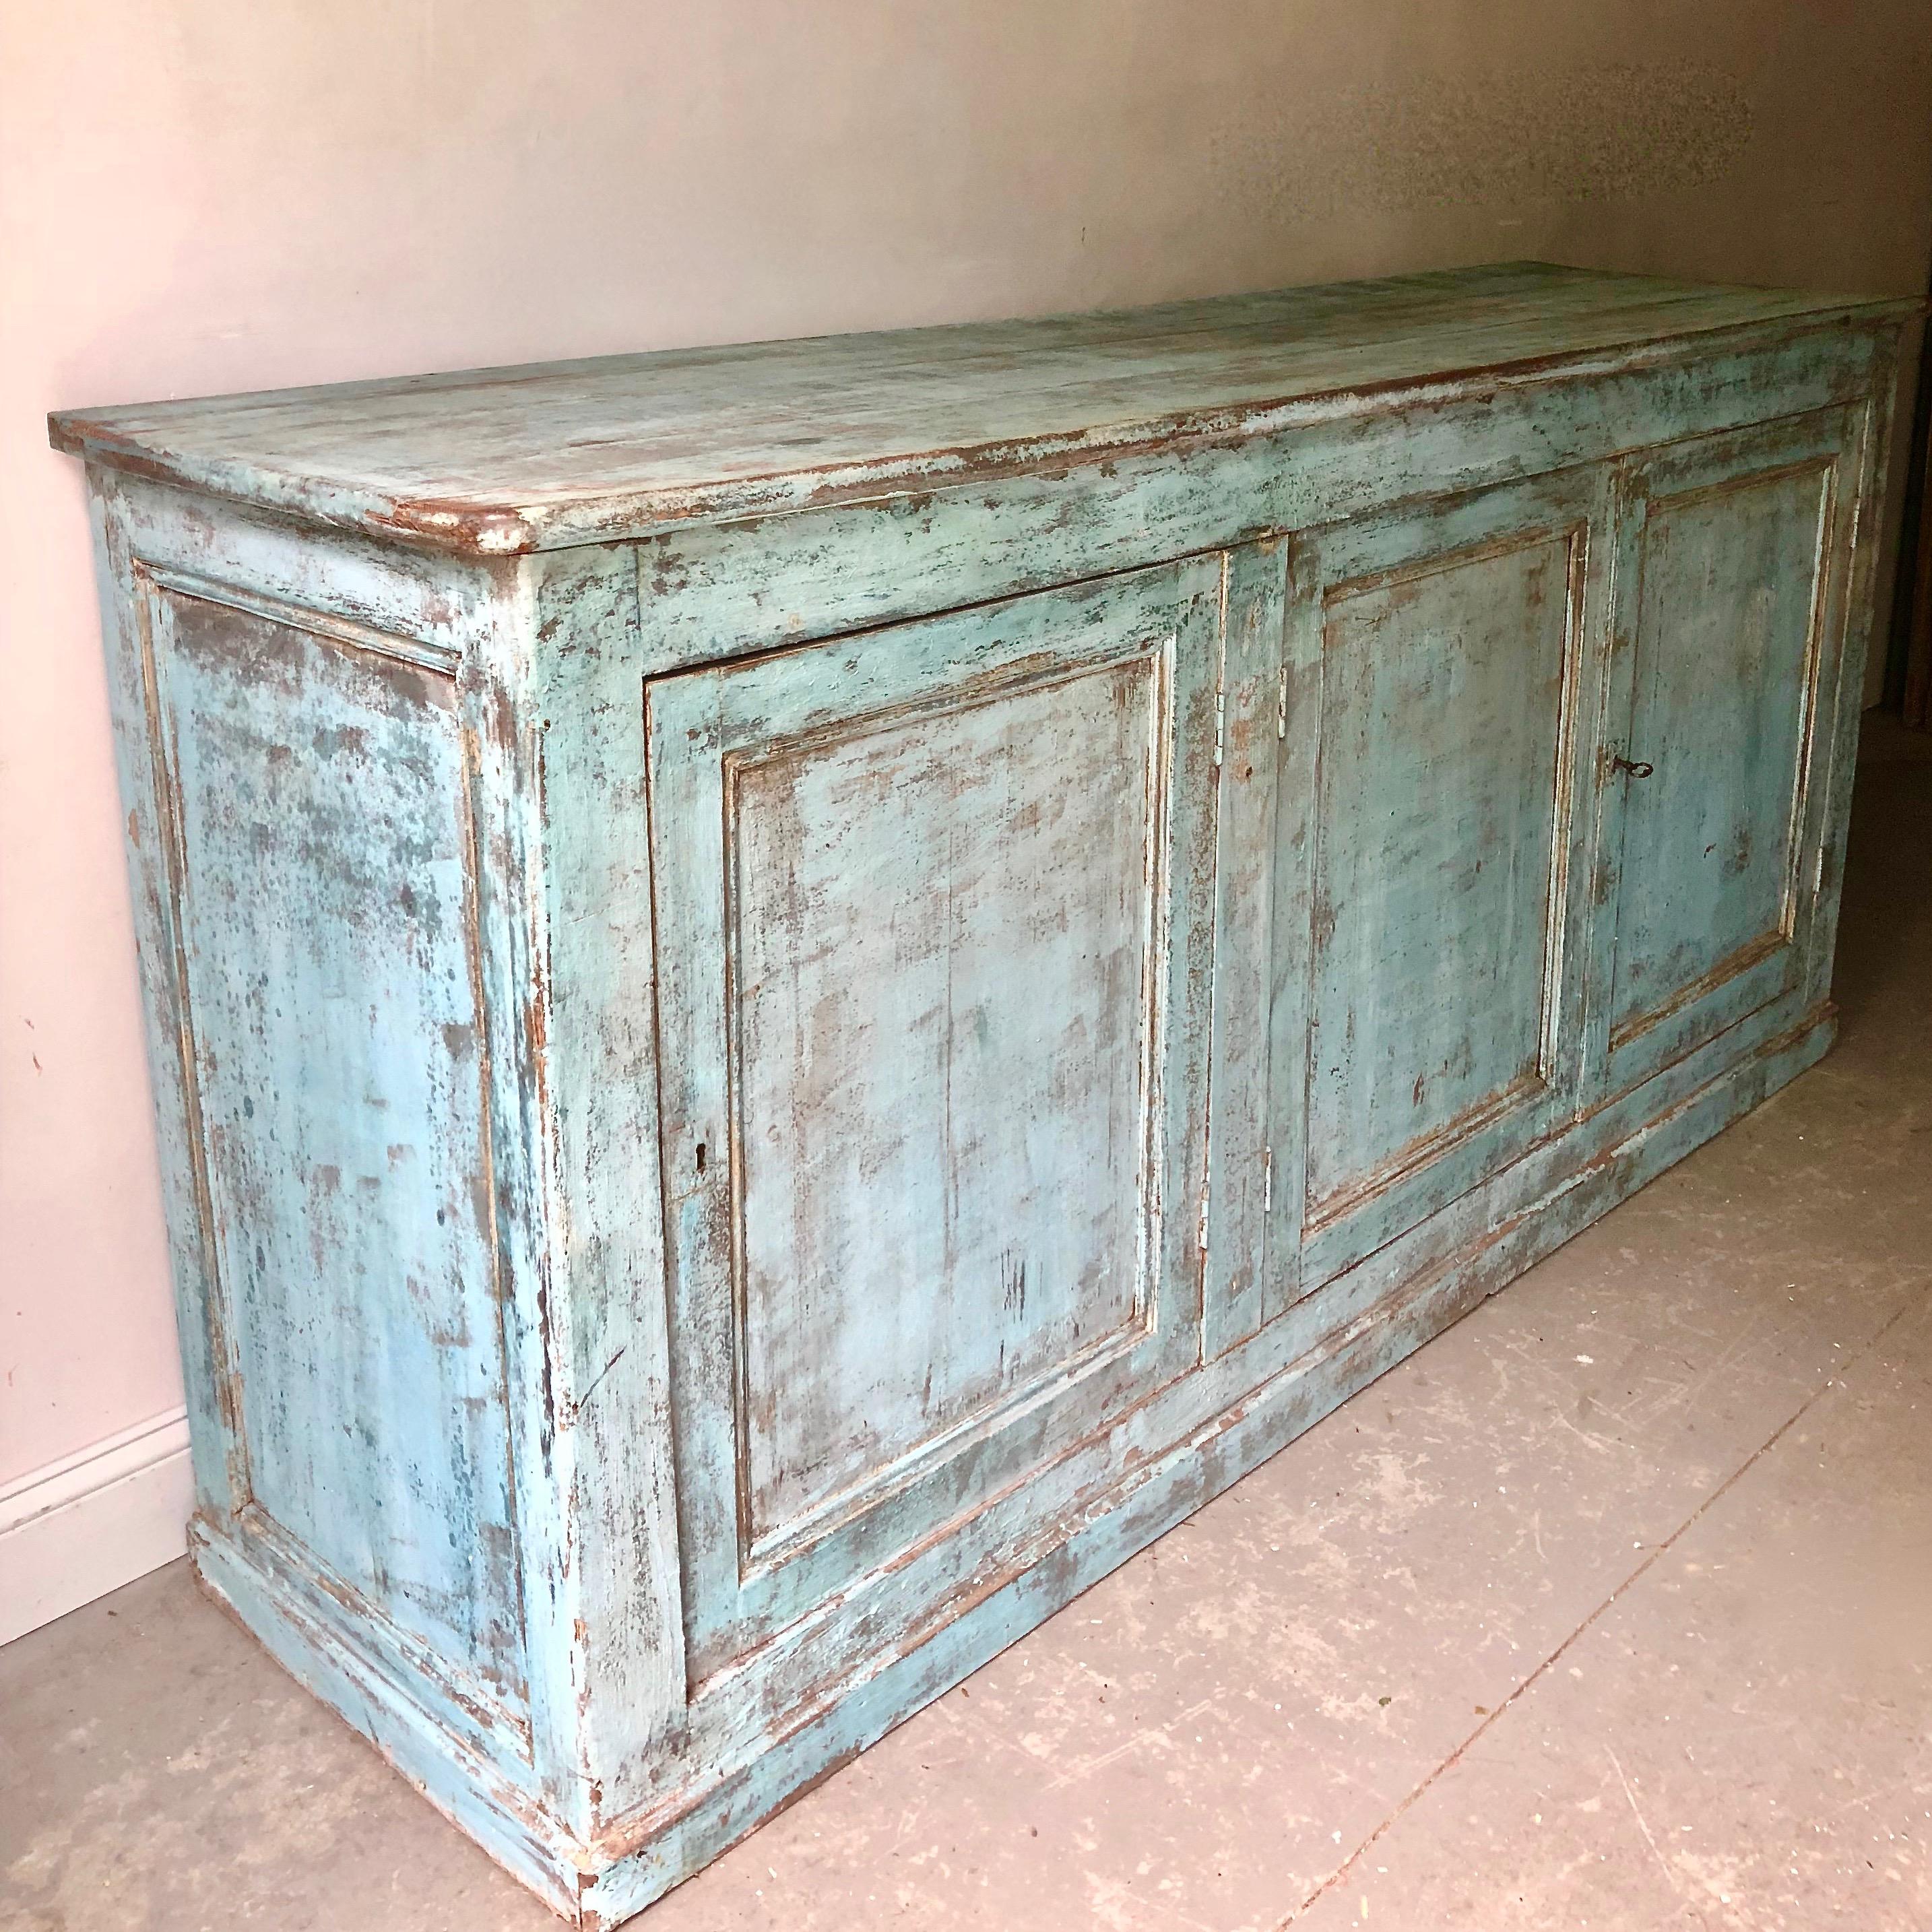 Handsome 19th century French painted enfilade or sideboard with three large panelled doors with brilliant color and patina.
Here are few examples. Surprising pieces and objects, authentic, decorative and rare items that you will only see in our